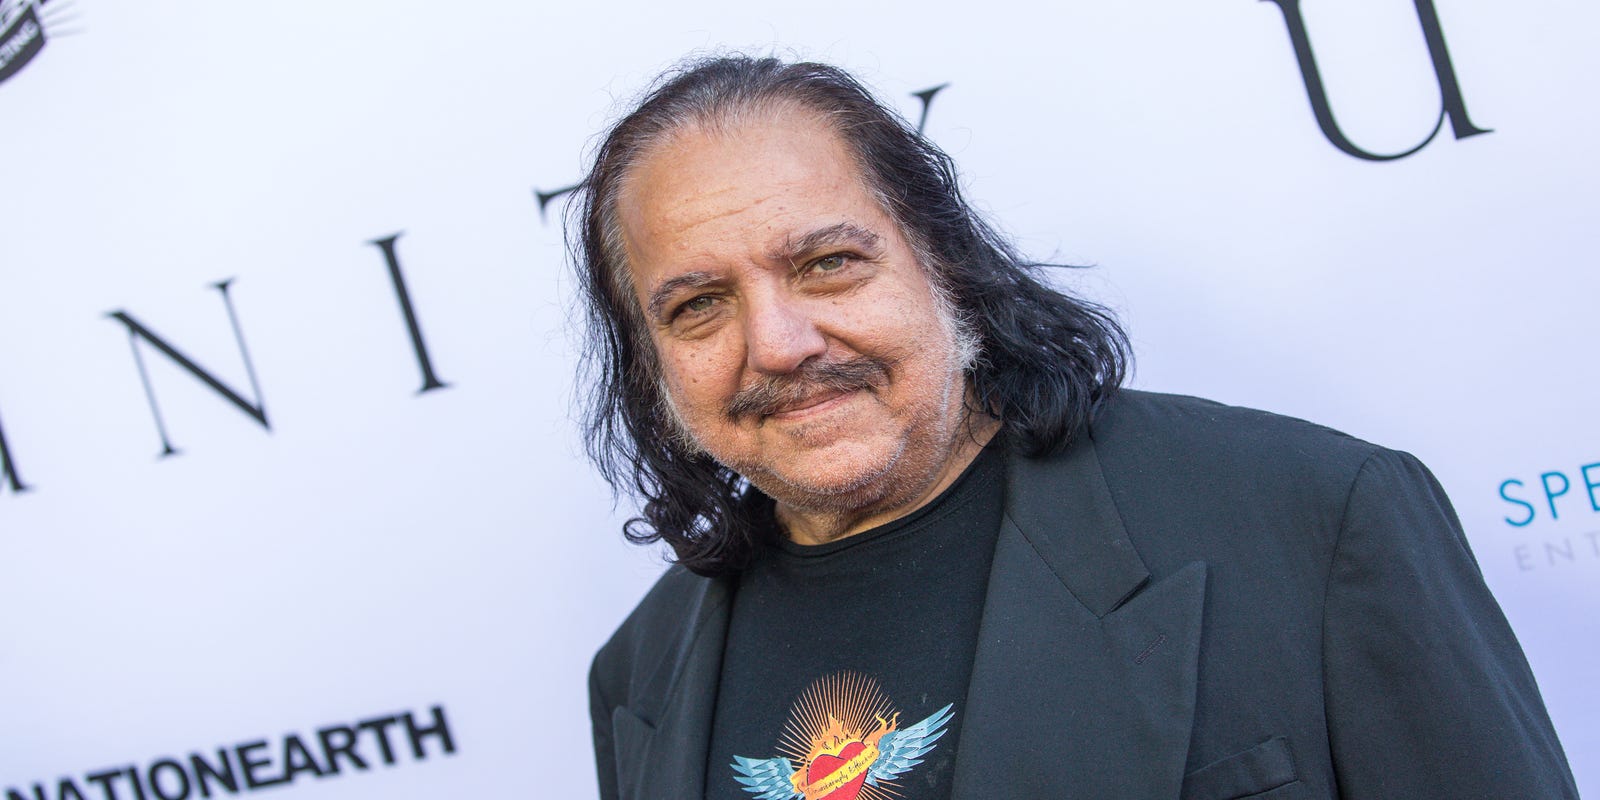 Ron Jeremy: Porn star charged with sexual assault of 4 women